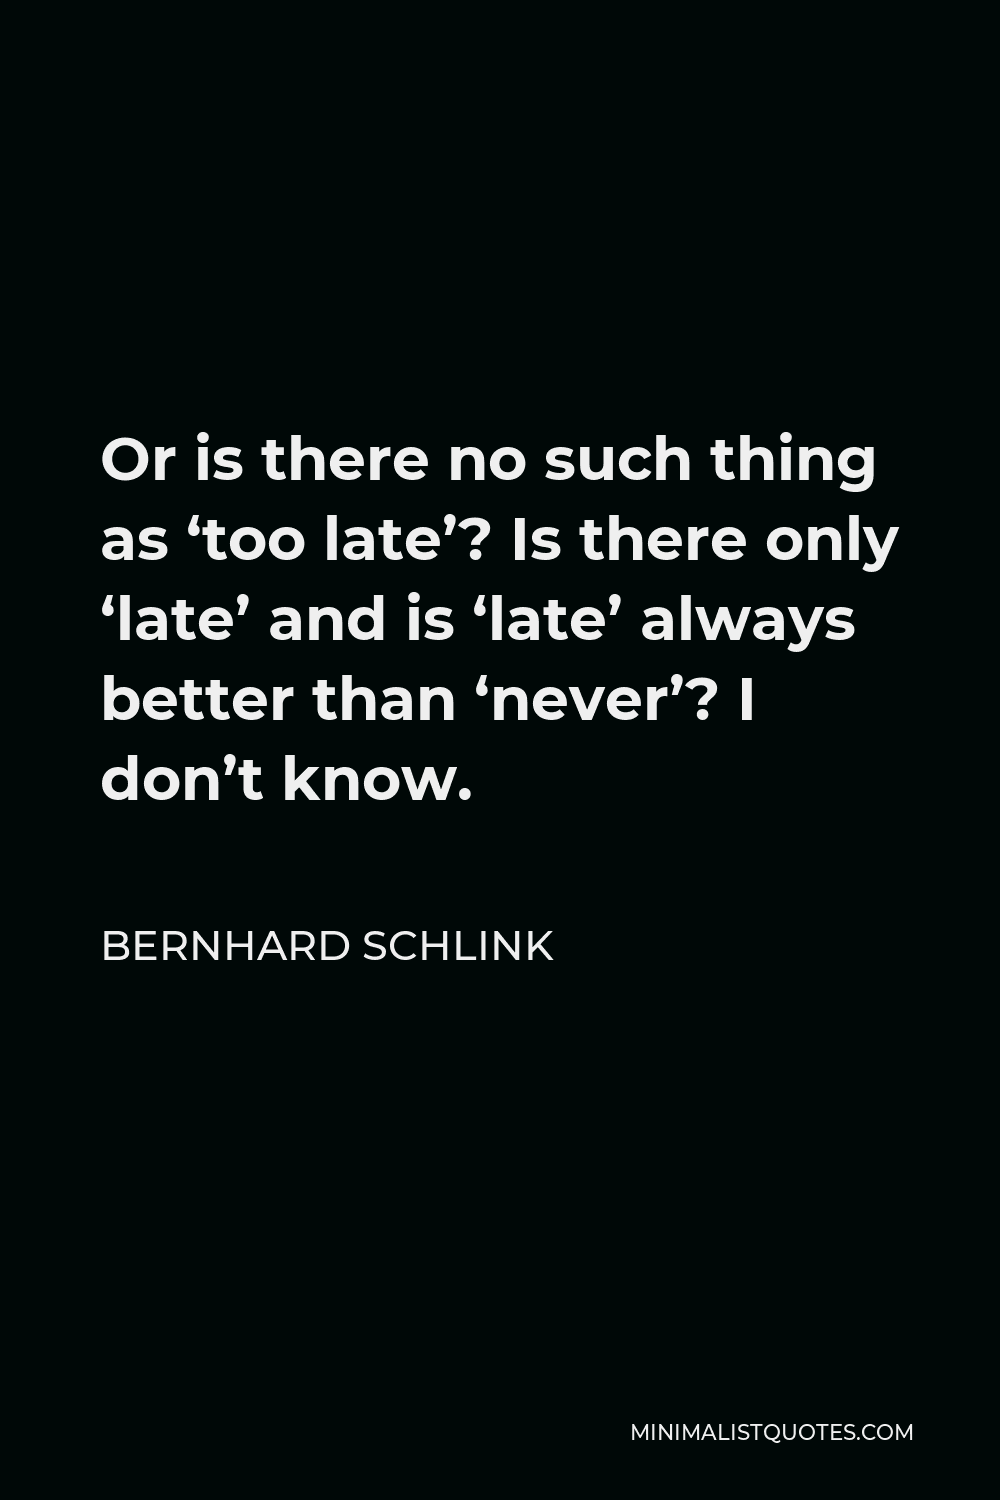 Bernhard Schlink Quote - Or is there no such thing as ‘too late’? Is there only ‘late’ and is ‘late’ always better than ‘never’? I don’t know.